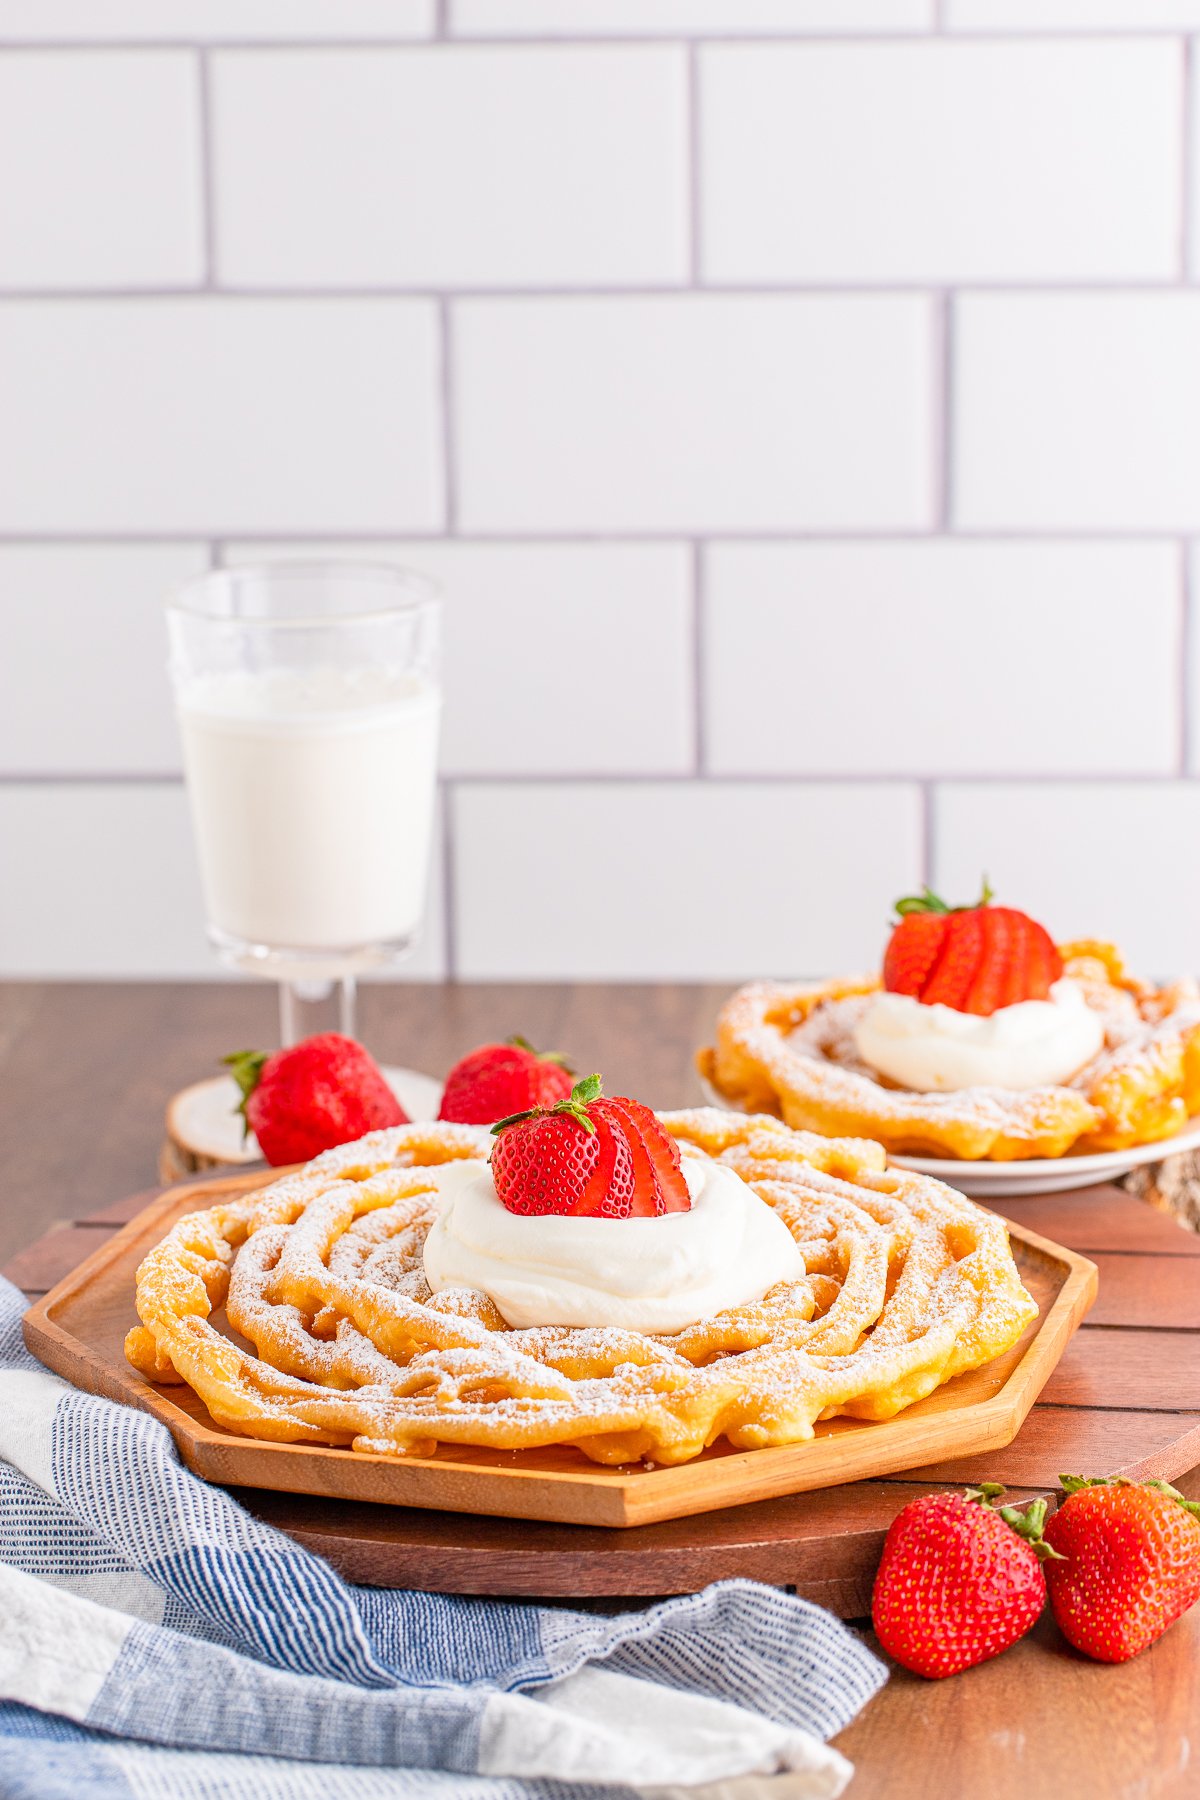 Two Funnel Cake Recipes on plates with garnishes.